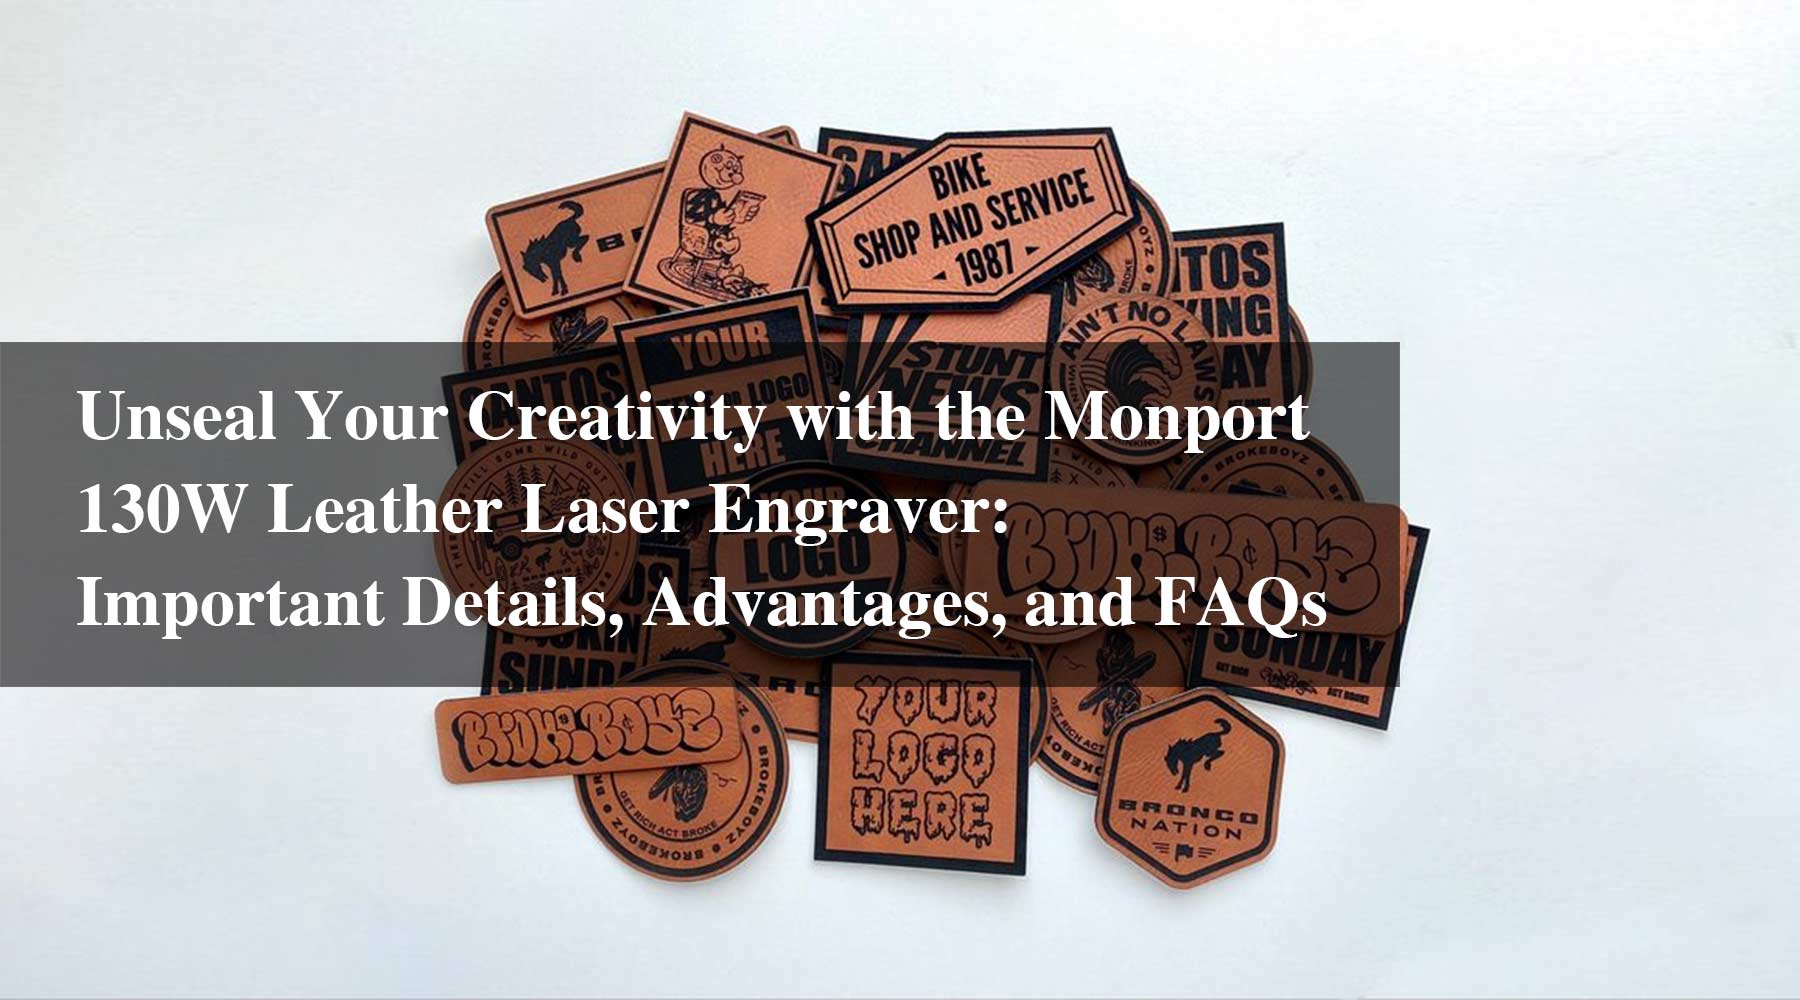 Unseal Your Creativity with the Monport 130W Leather Laser Engraver: Important Details, Advantages, and FAQs